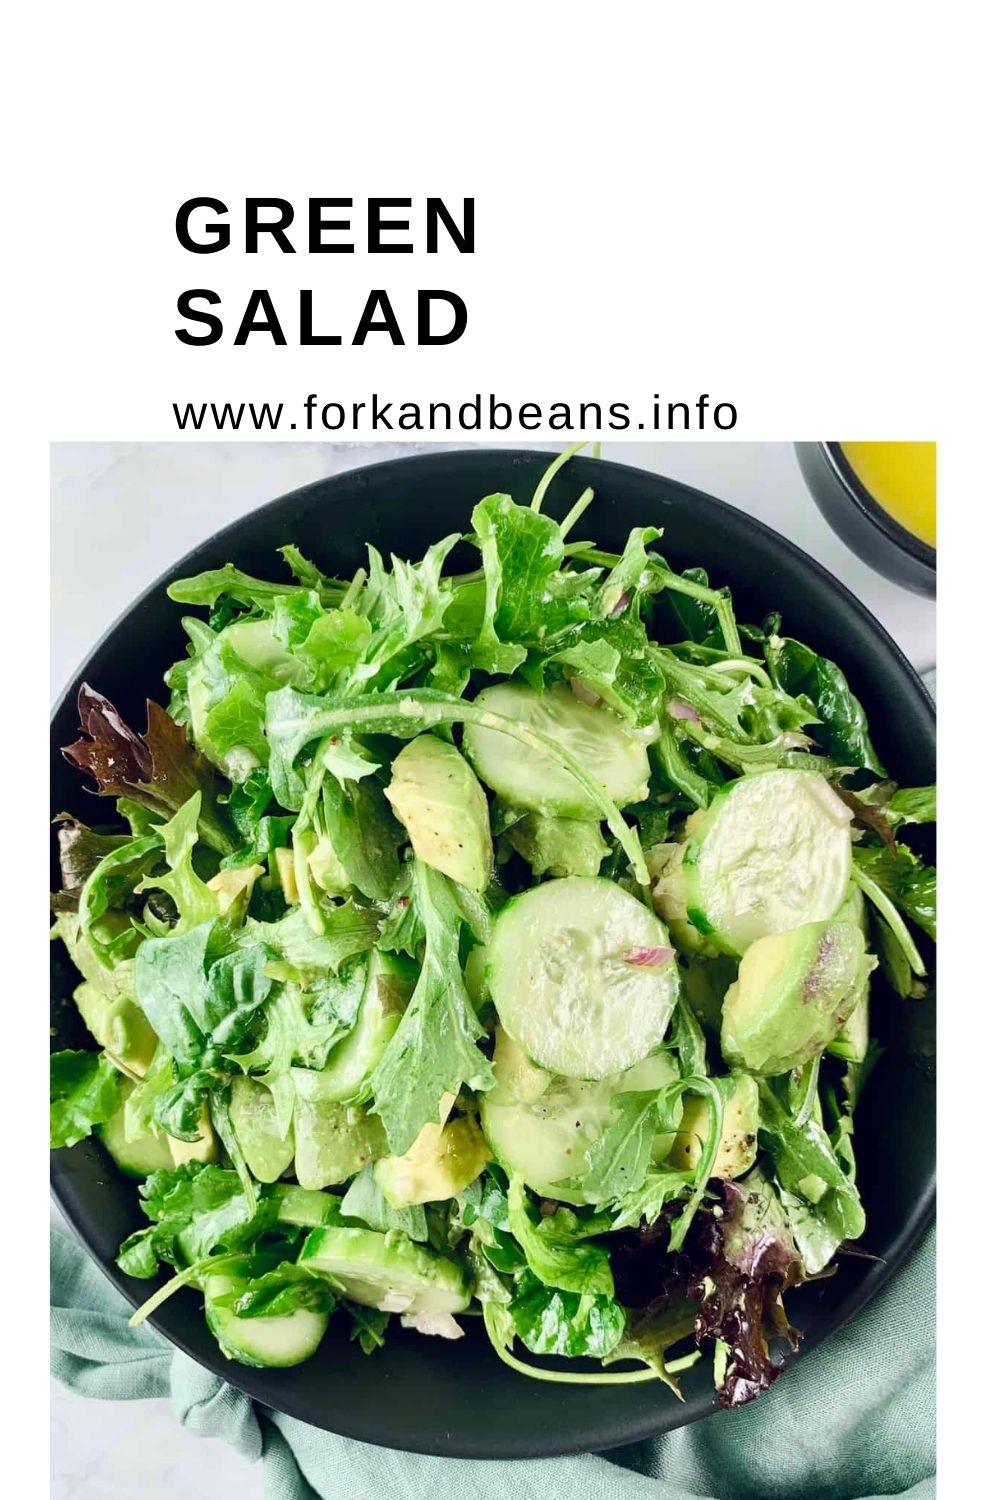 Famous French Green Salad with French Vinaigrette